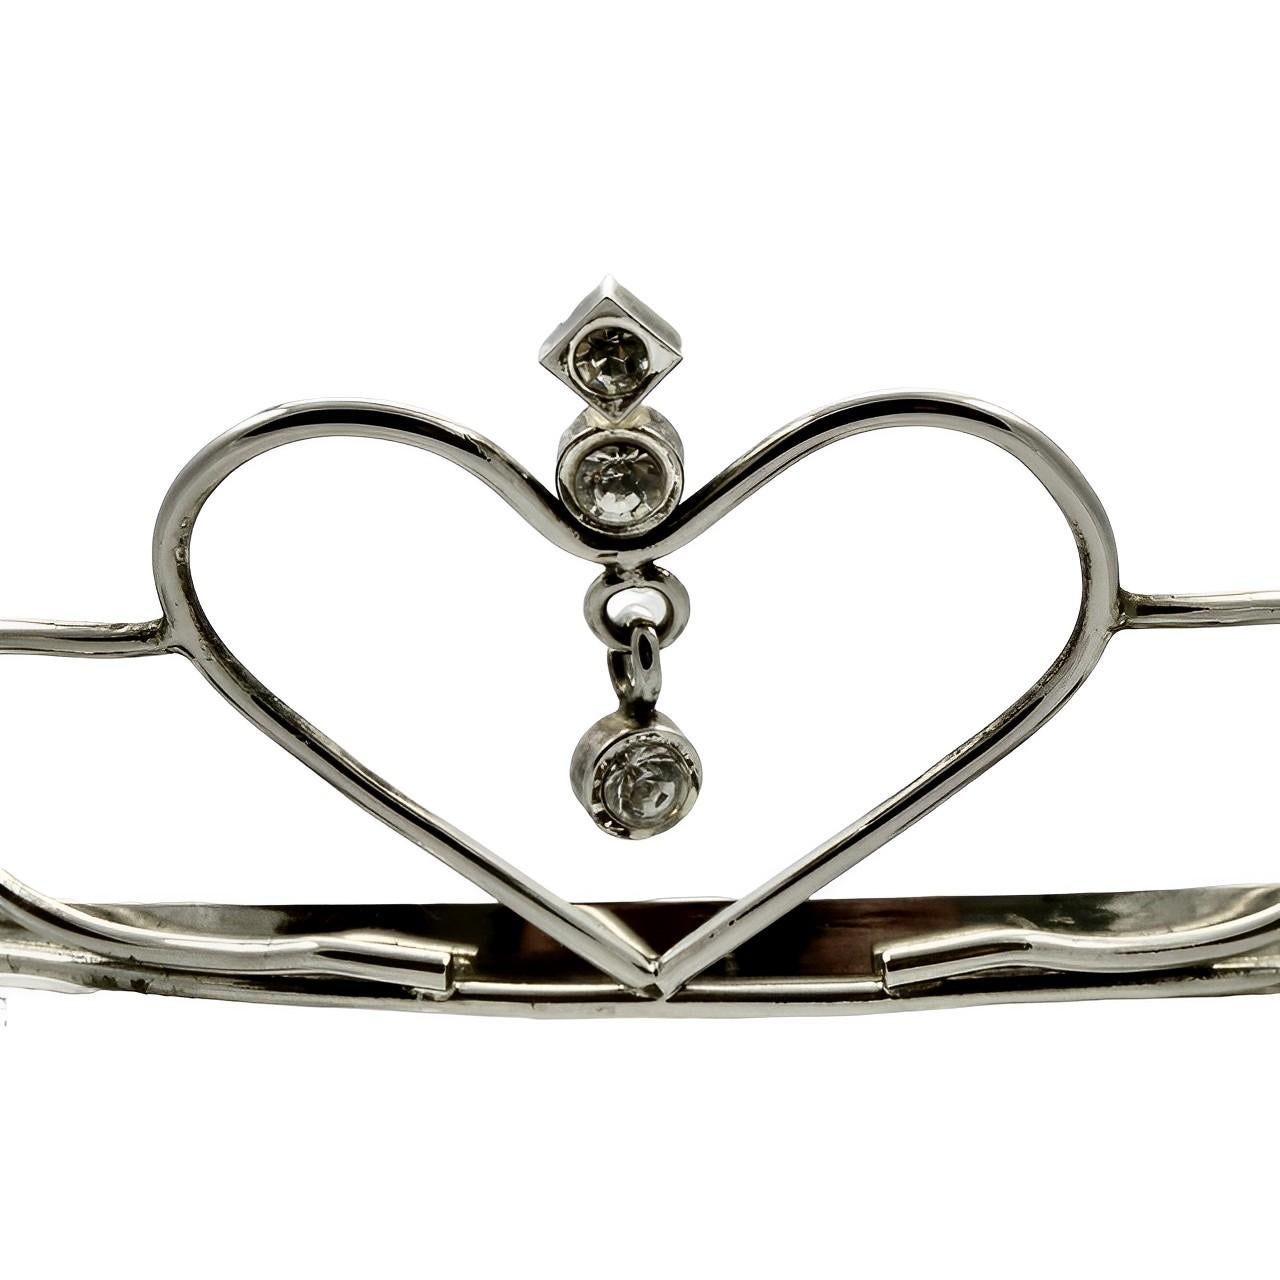 
Lovely silver plated tiara featuring a heart and rhinestone design, with combs at each end. Measuring height at the front 4 cm / 1.5 inches. The tiara is in very good condition, there is very little wear to the silver plating. We replaced a missing